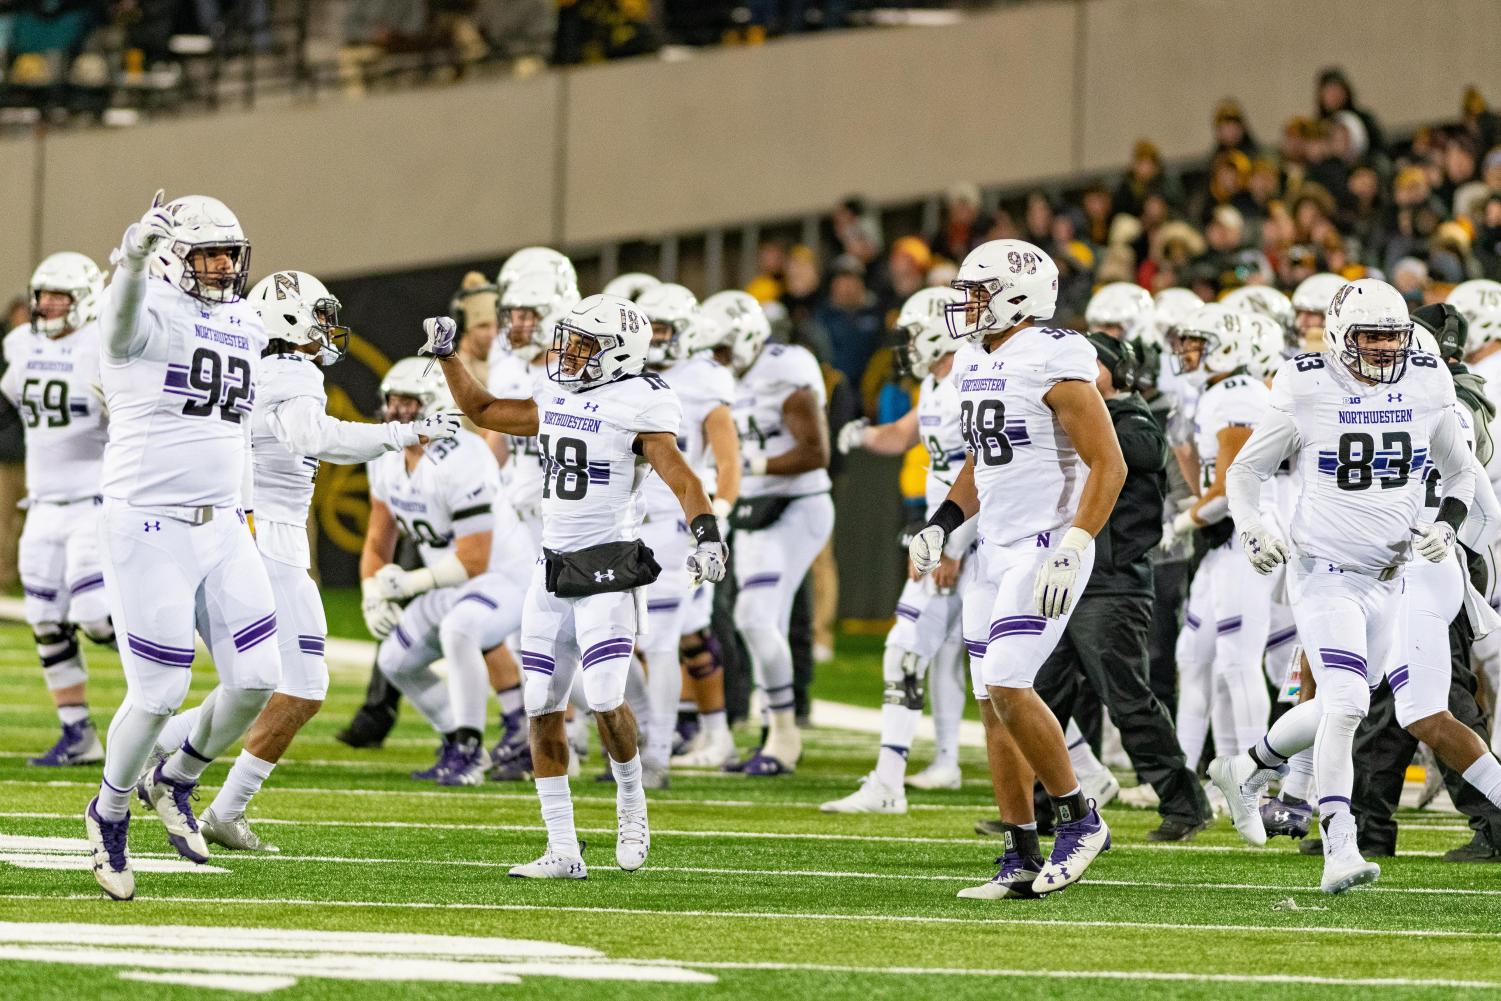 Northwestern+players+celebrate+after+a+touchdown.+The+Wildcats+clinched+the+Big+Ten+West+with+a+win+against+Iowa.